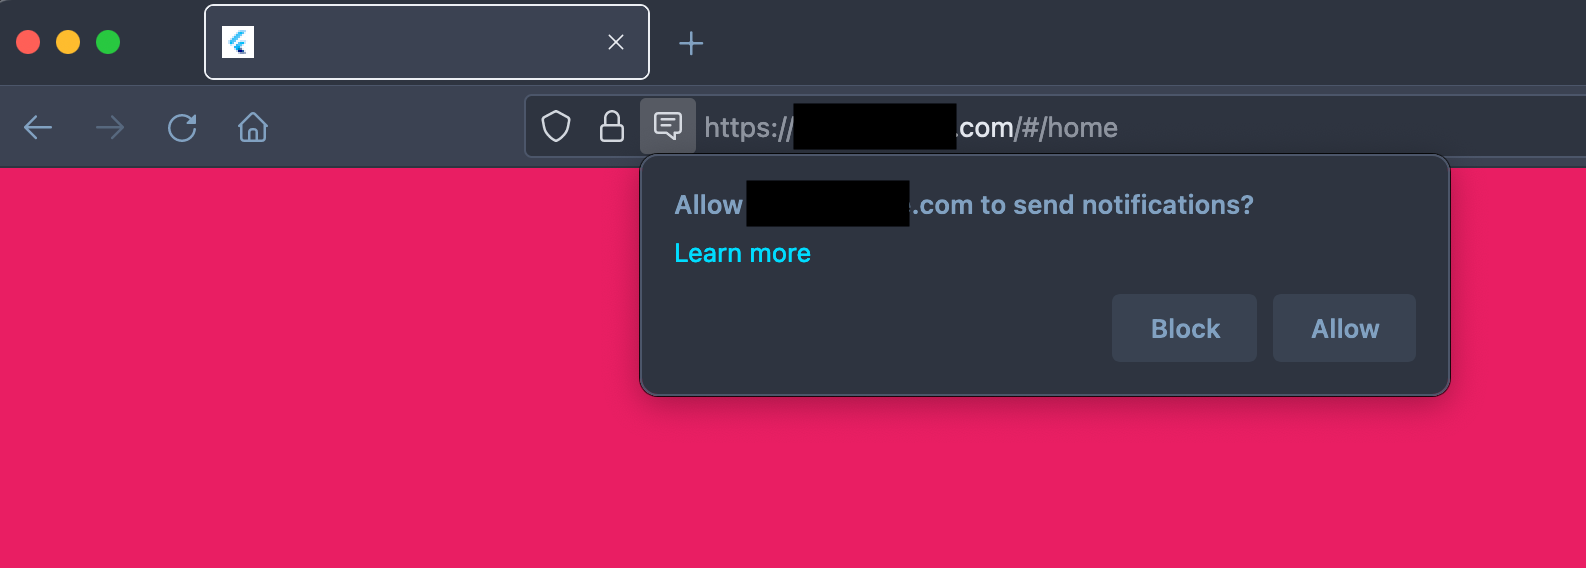 Firefox asking me if I want to allow push notifications on my Flutter app